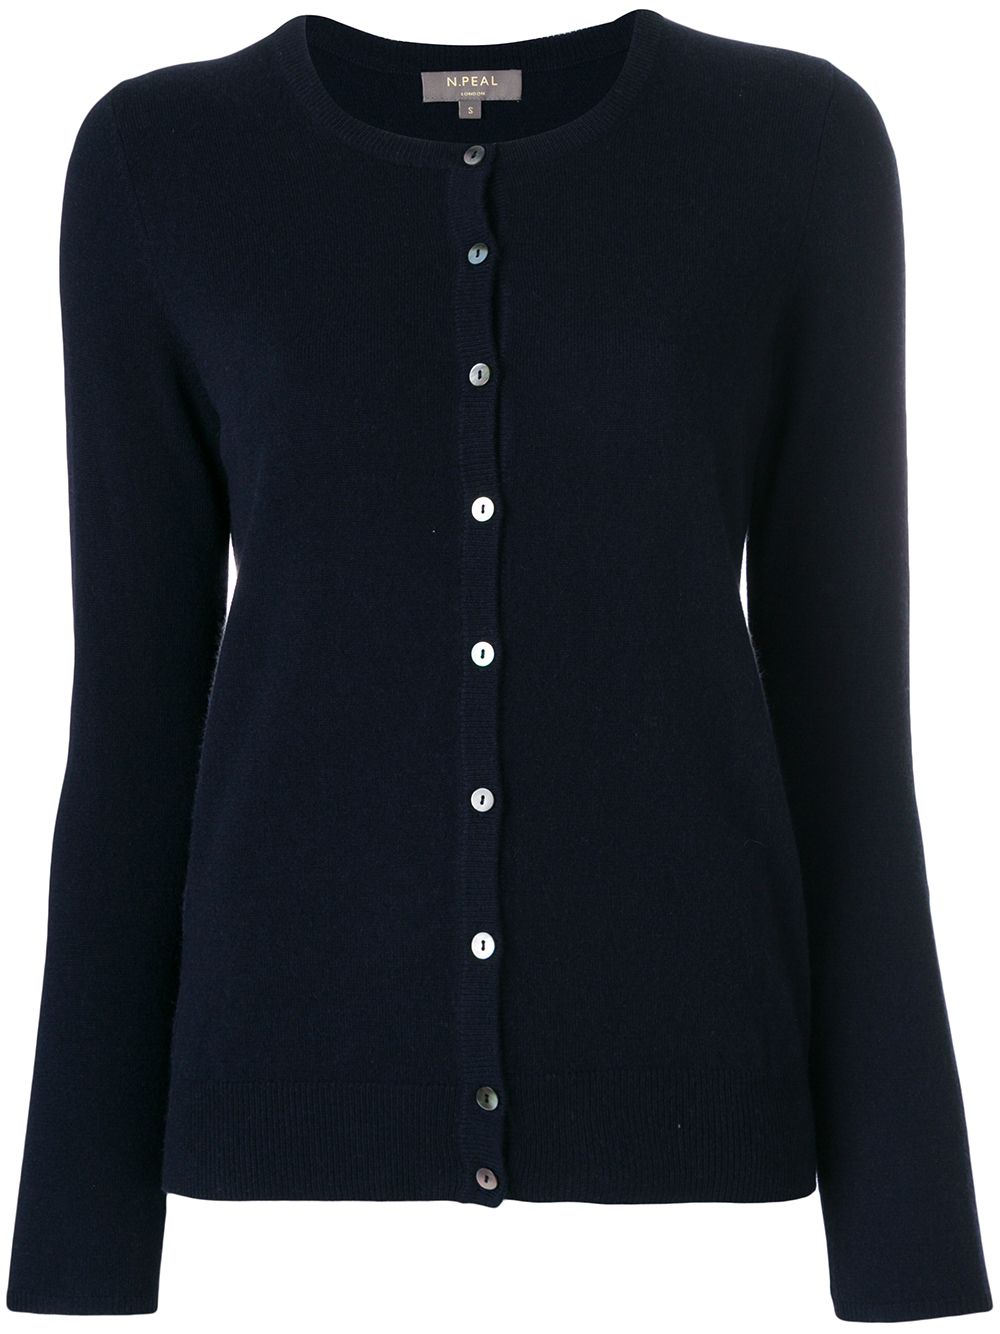 Image 1 of N.Peal cashmere round neck cardigan